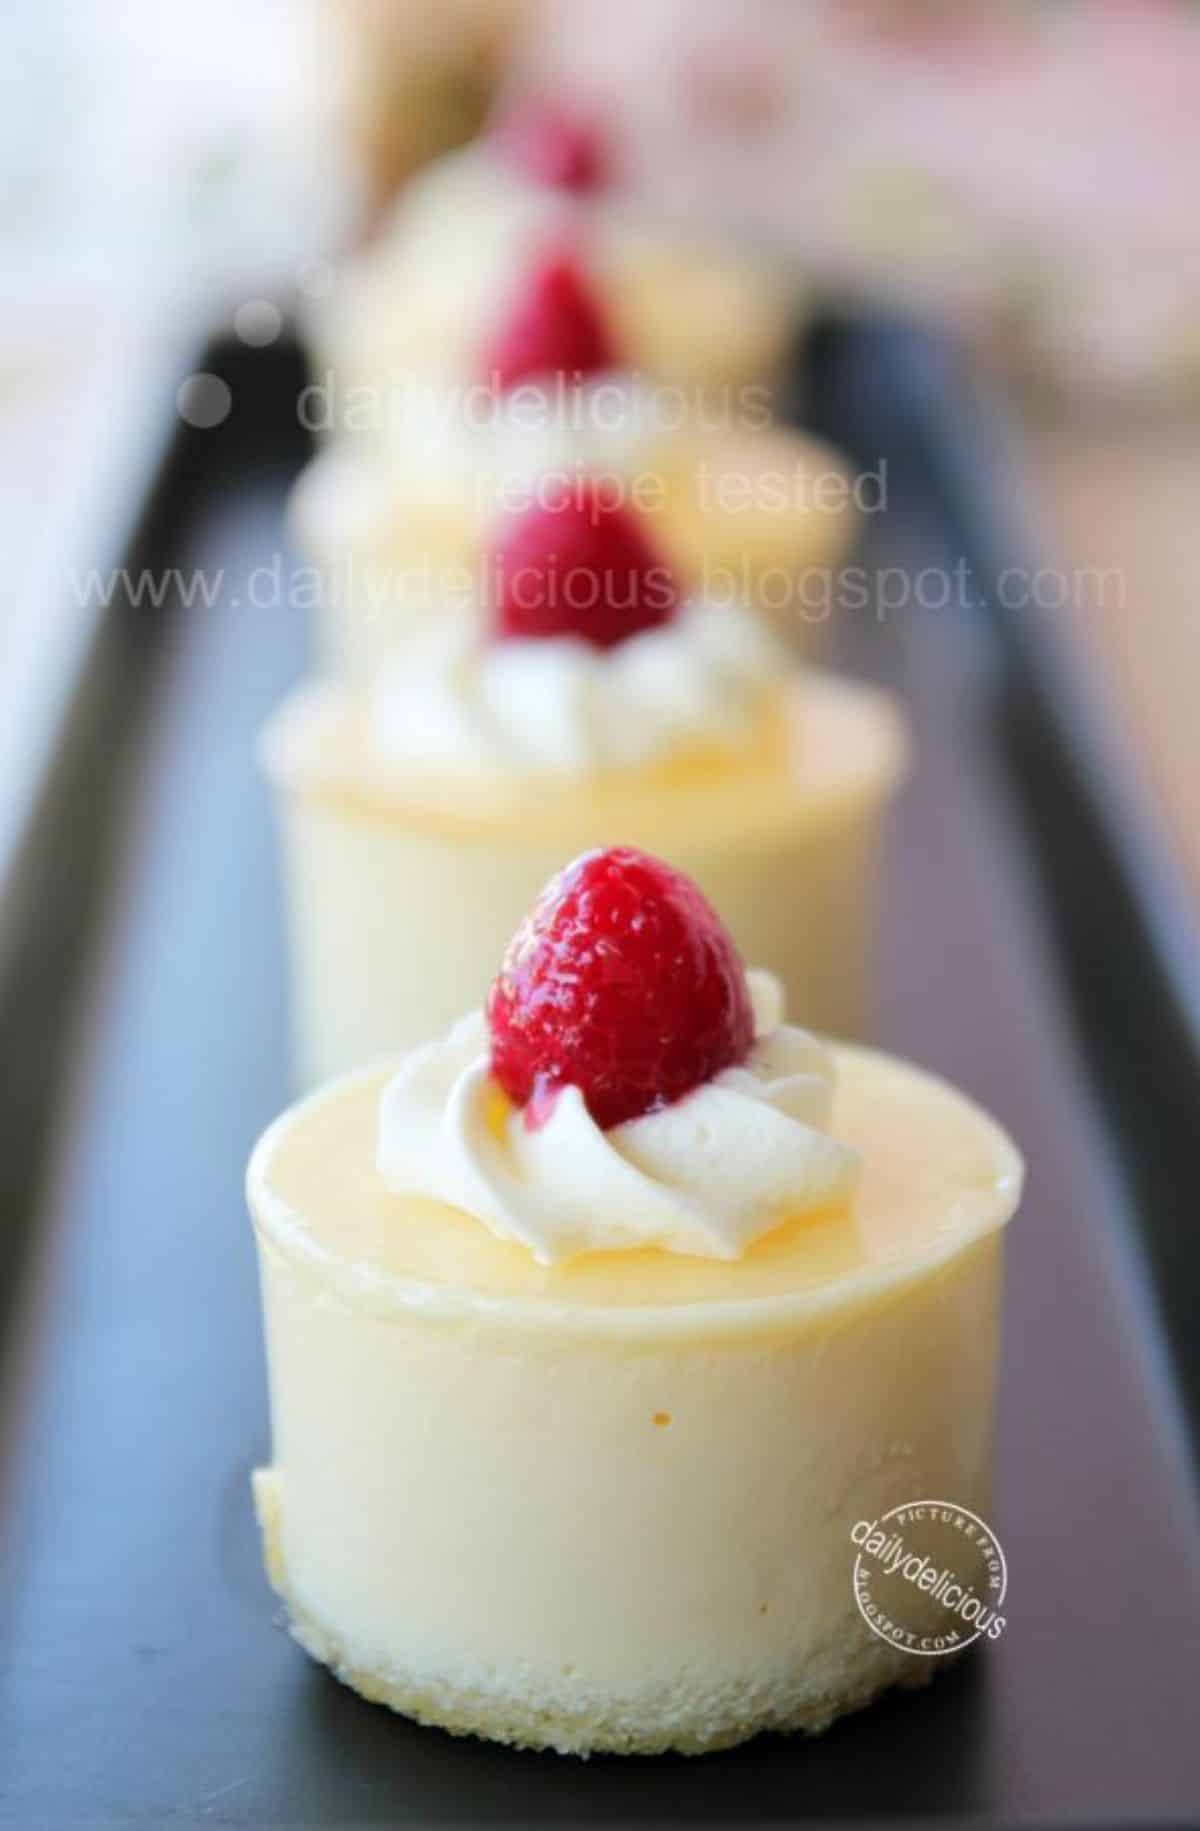 Flavorful passion fruit mousse on a black tray.